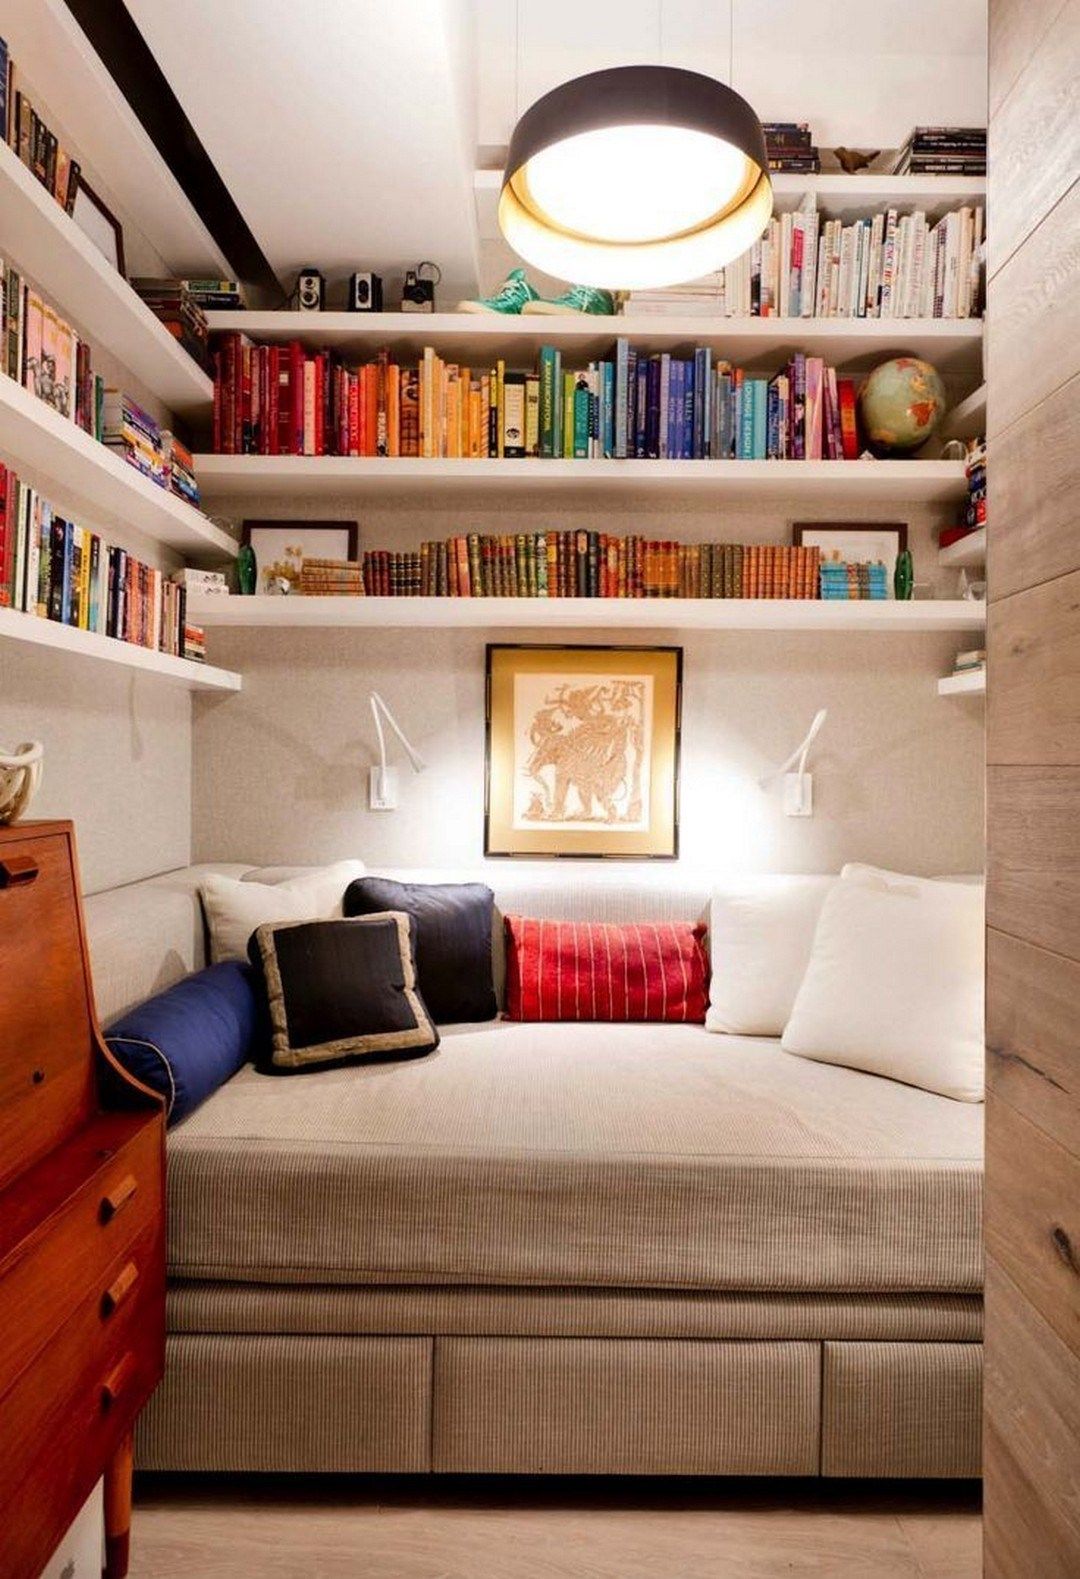 Creating A Cozy Reading Nook At Home: 5 Simple Steps